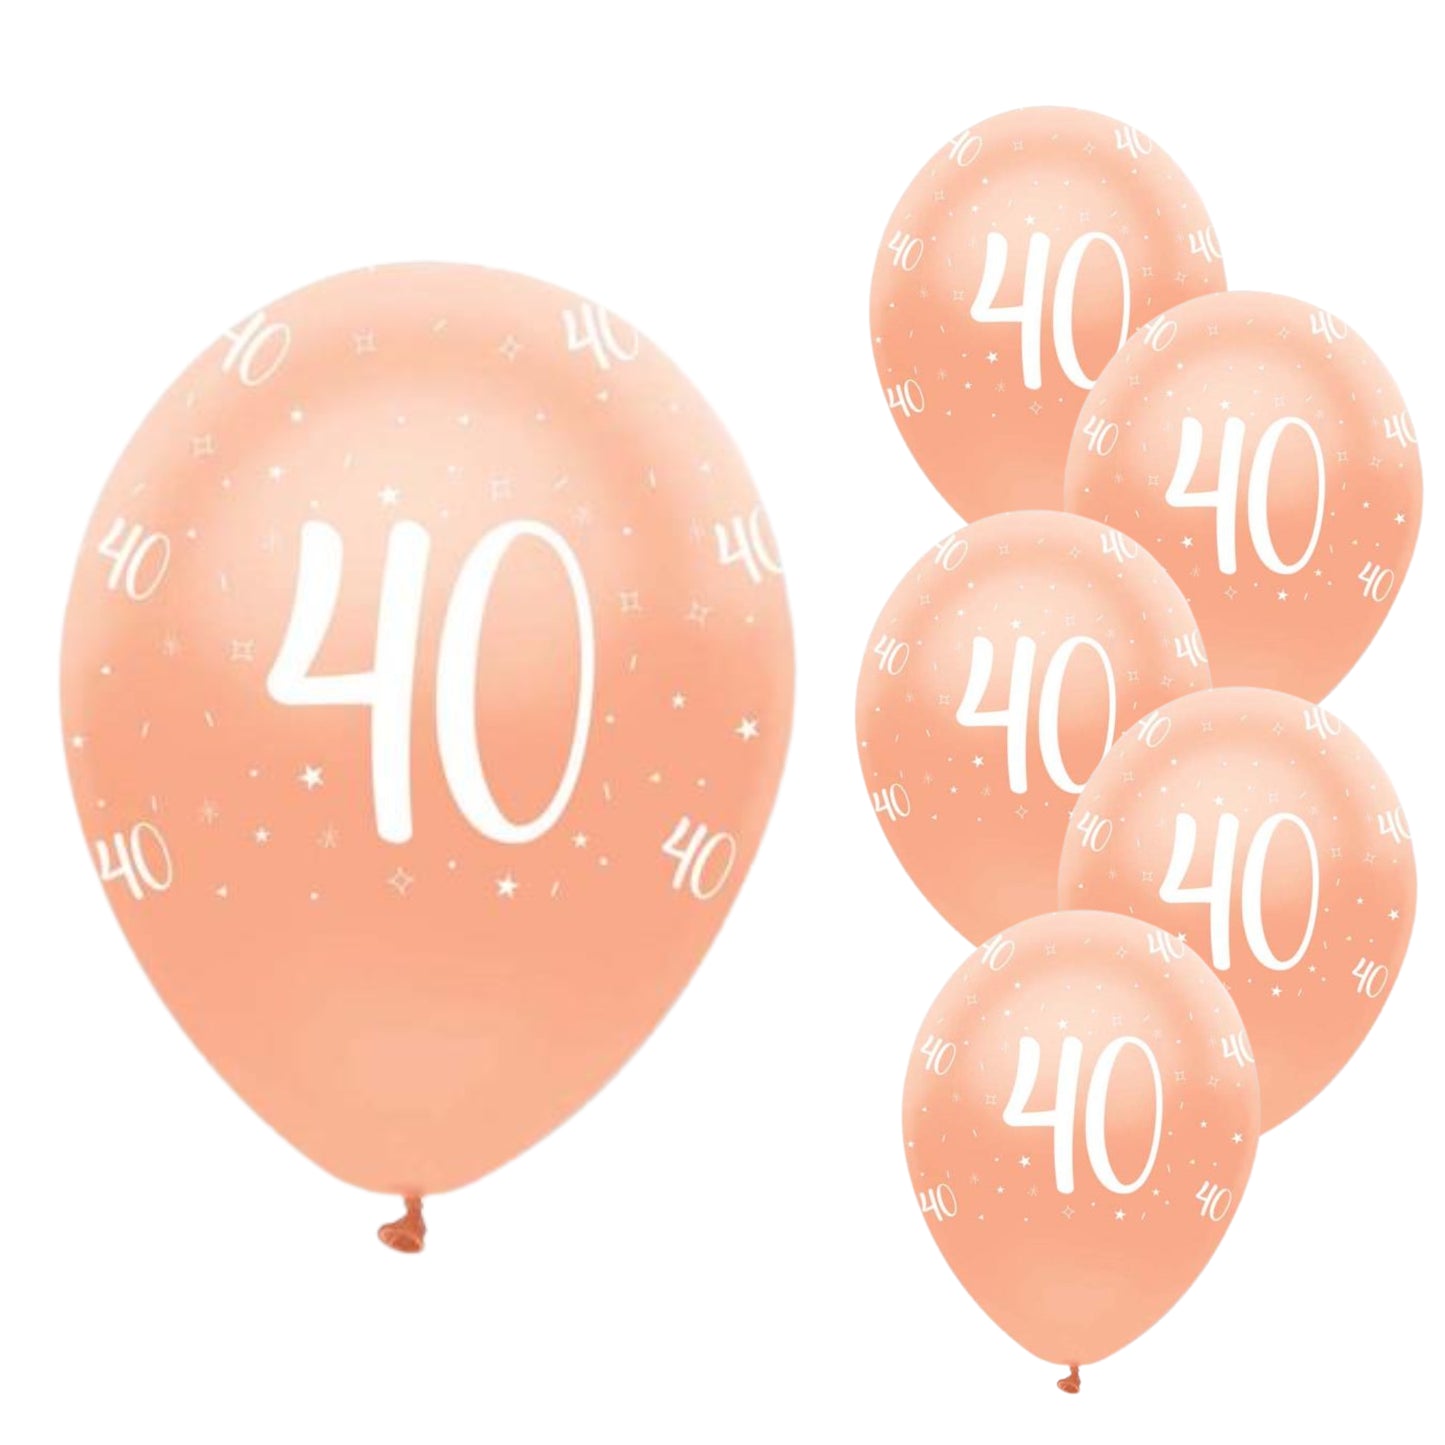 Rose Gold Age 40, 6 Latex Balloons by Creative Party